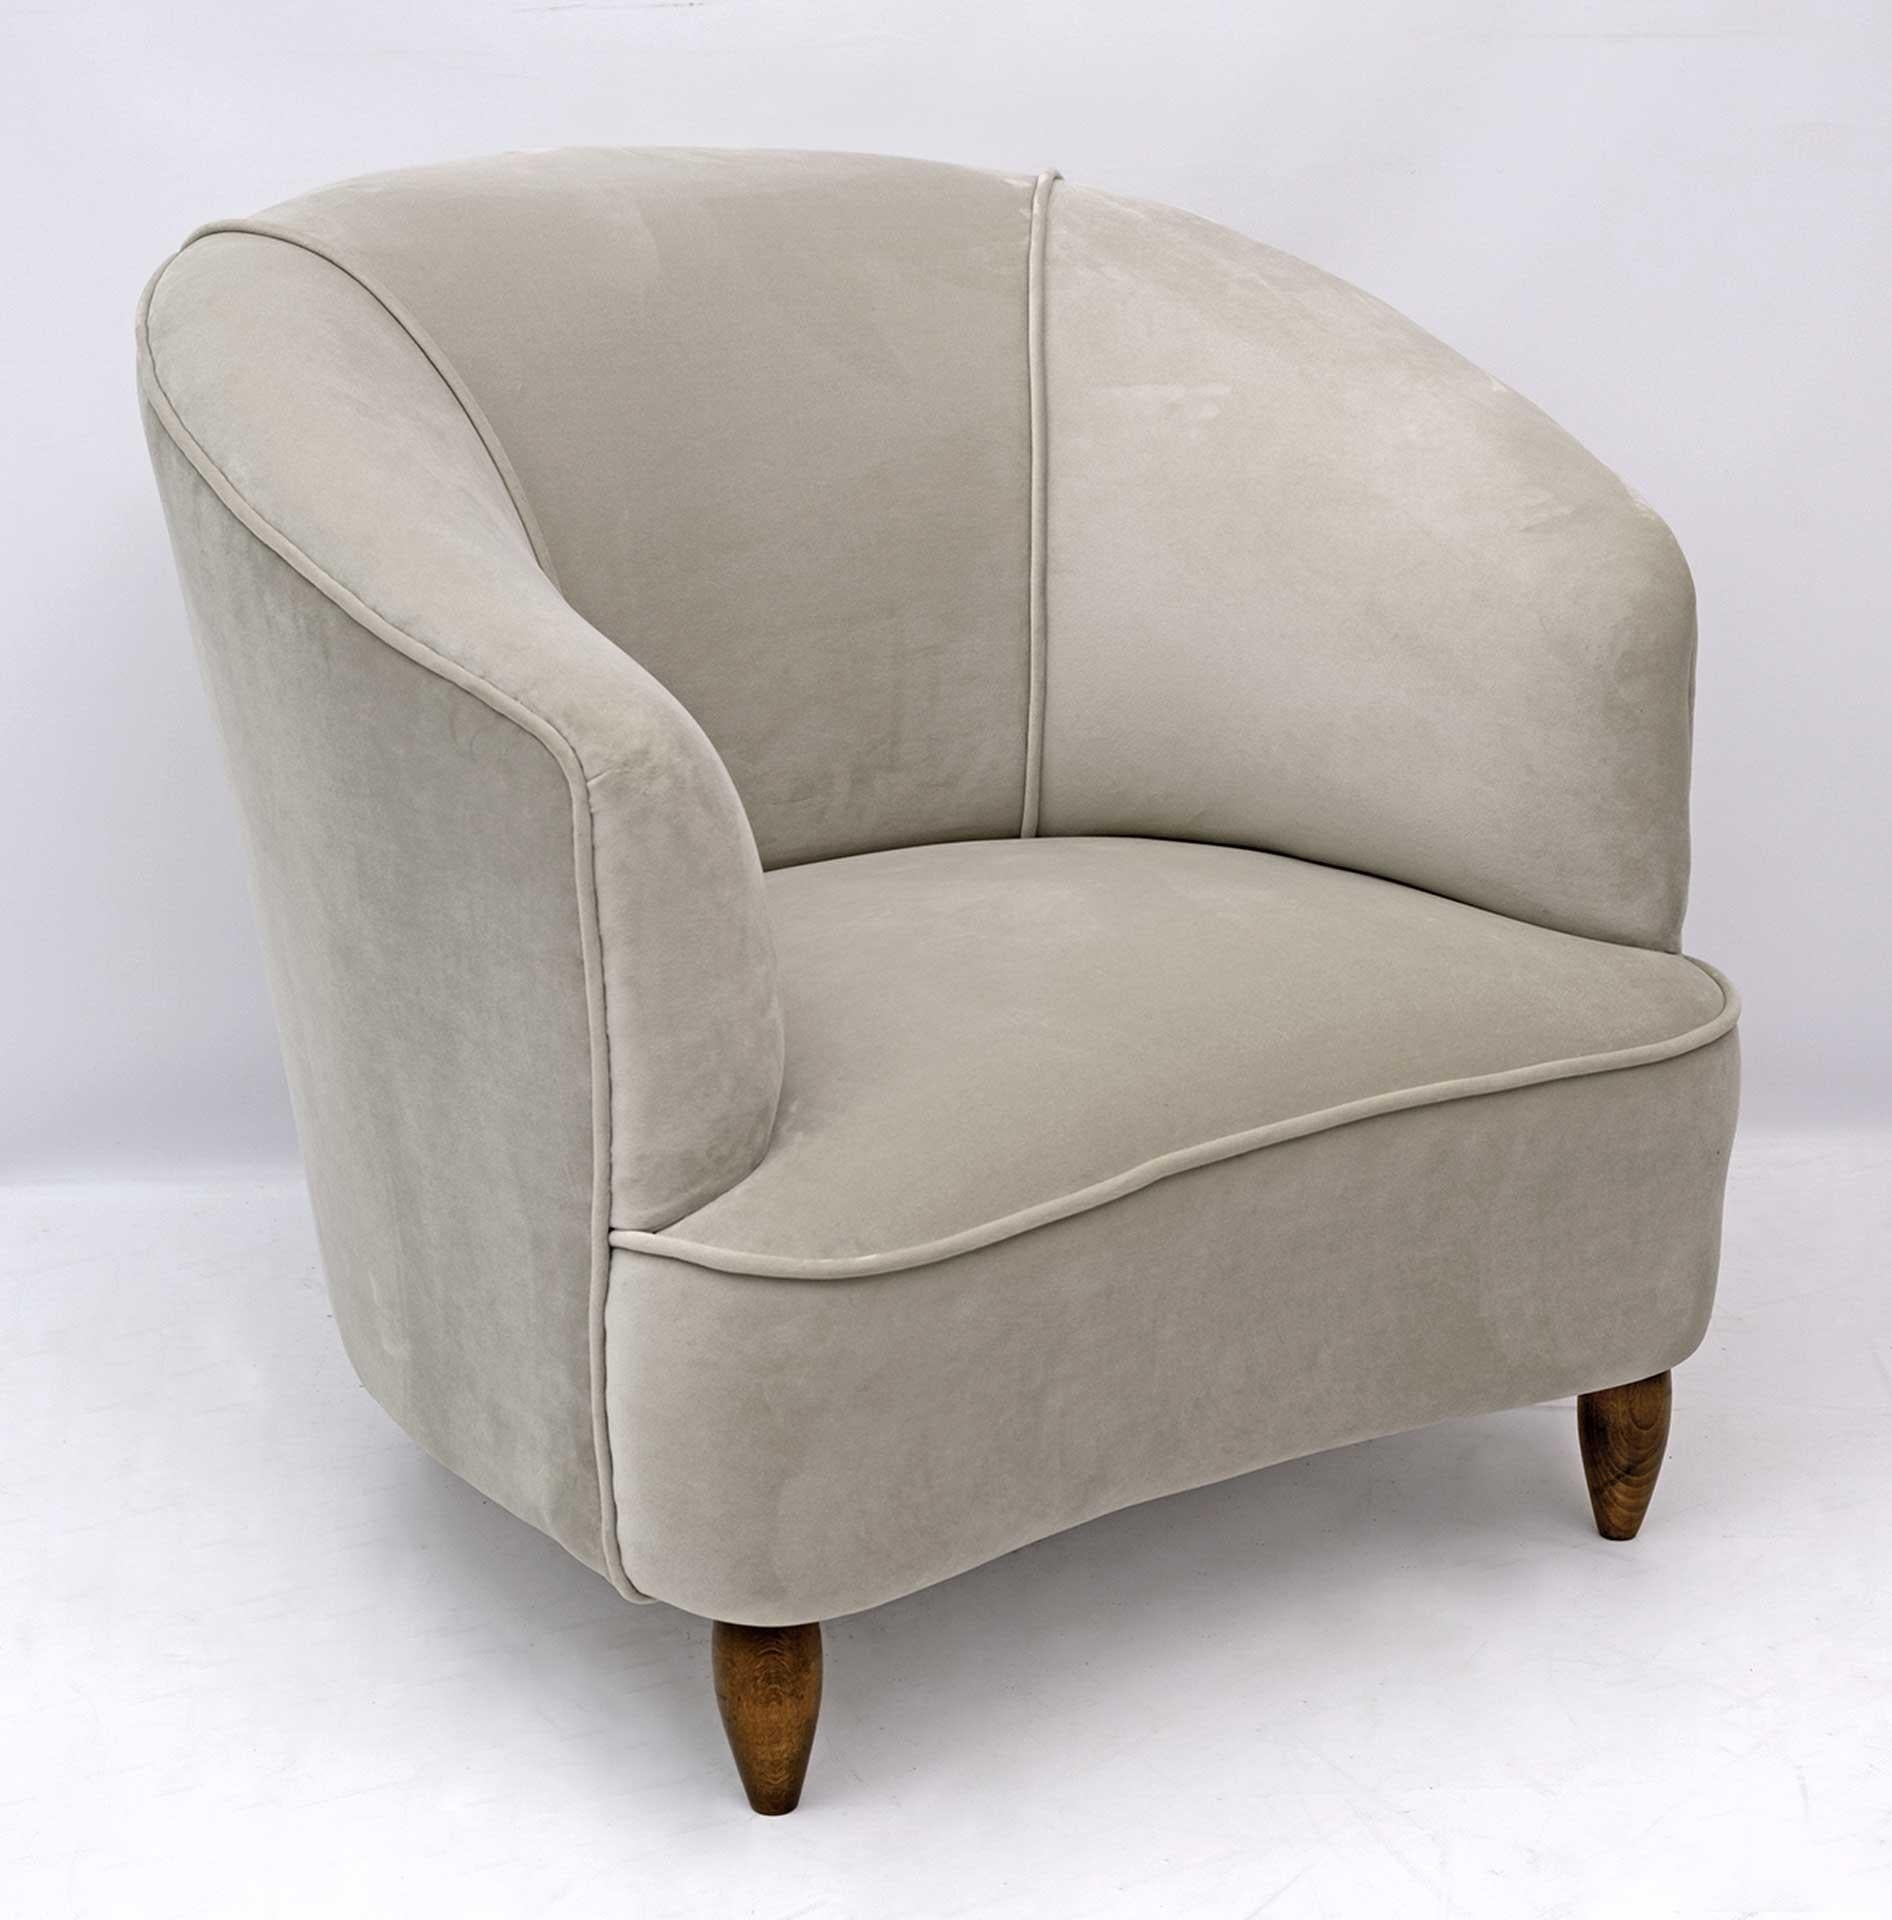 Armchair designed by Gio Ponti and produced by Casa e Giardino in 1936.
The armchair has been restored and upholstered in velvet.